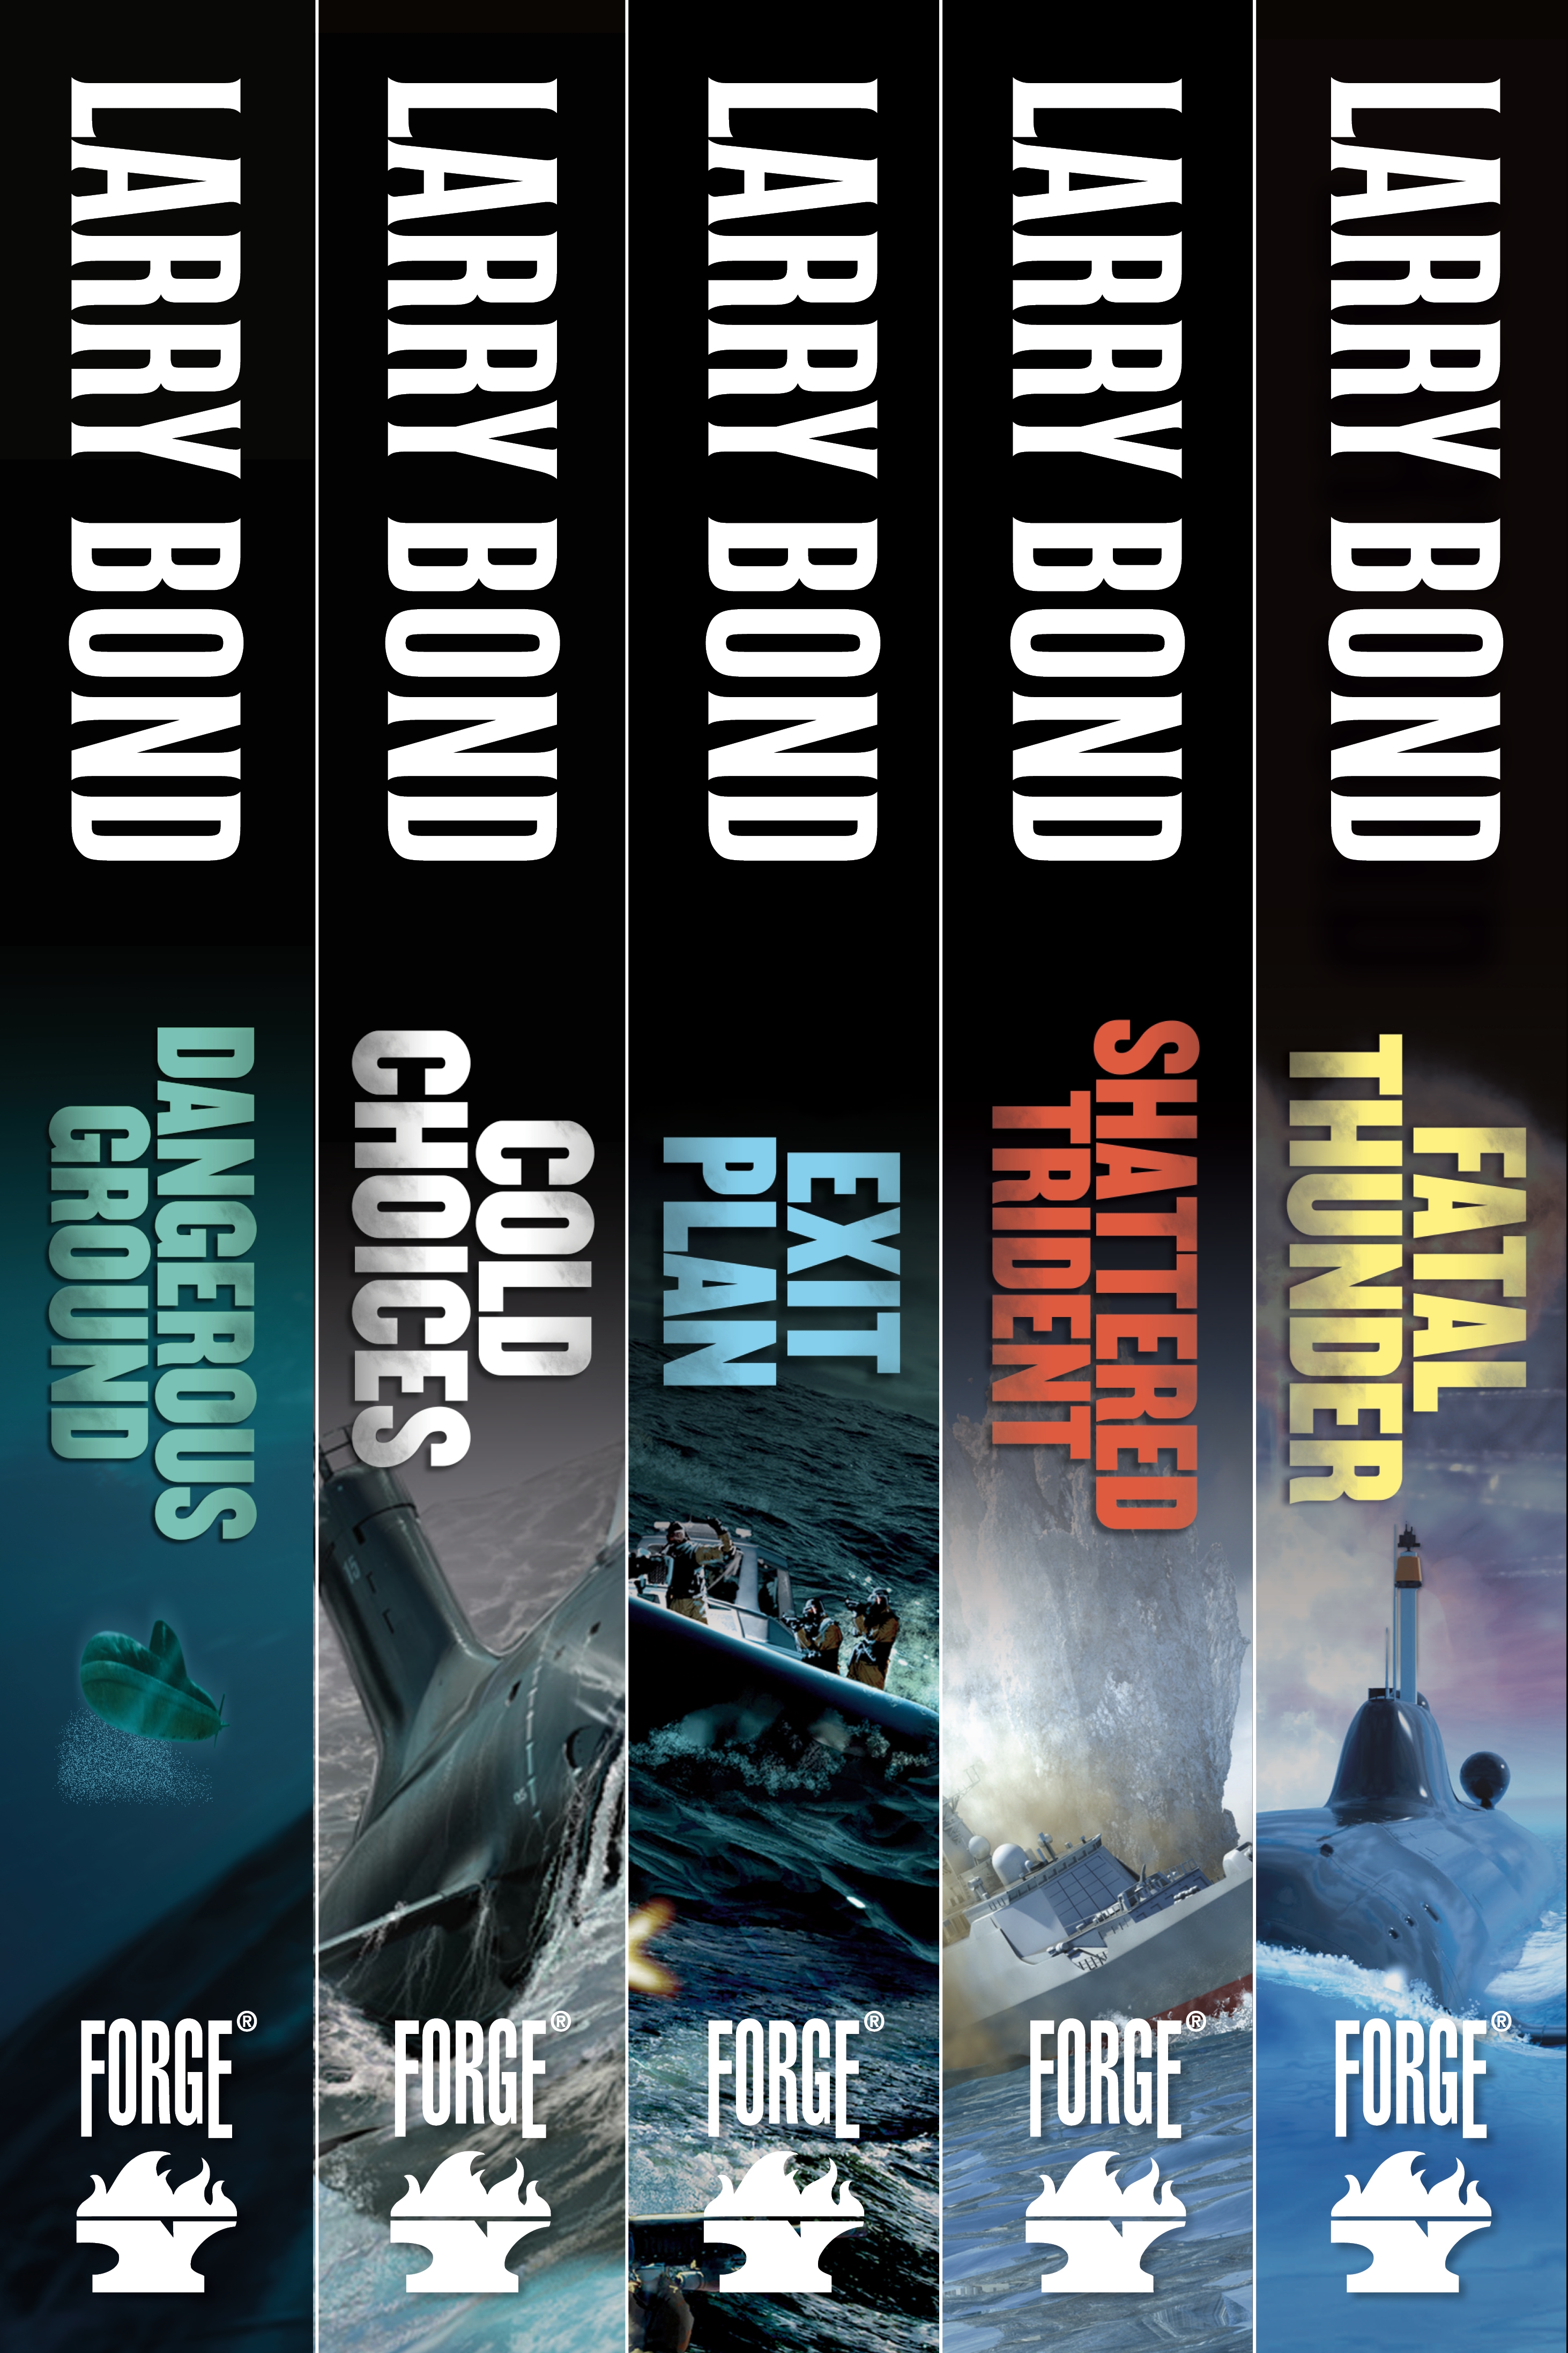 The Jerry Mitchell Series : Dangerous Ground, Cold Choices, Exit Plan, Shattered Trident, Fatal Thunder by Larry Bond